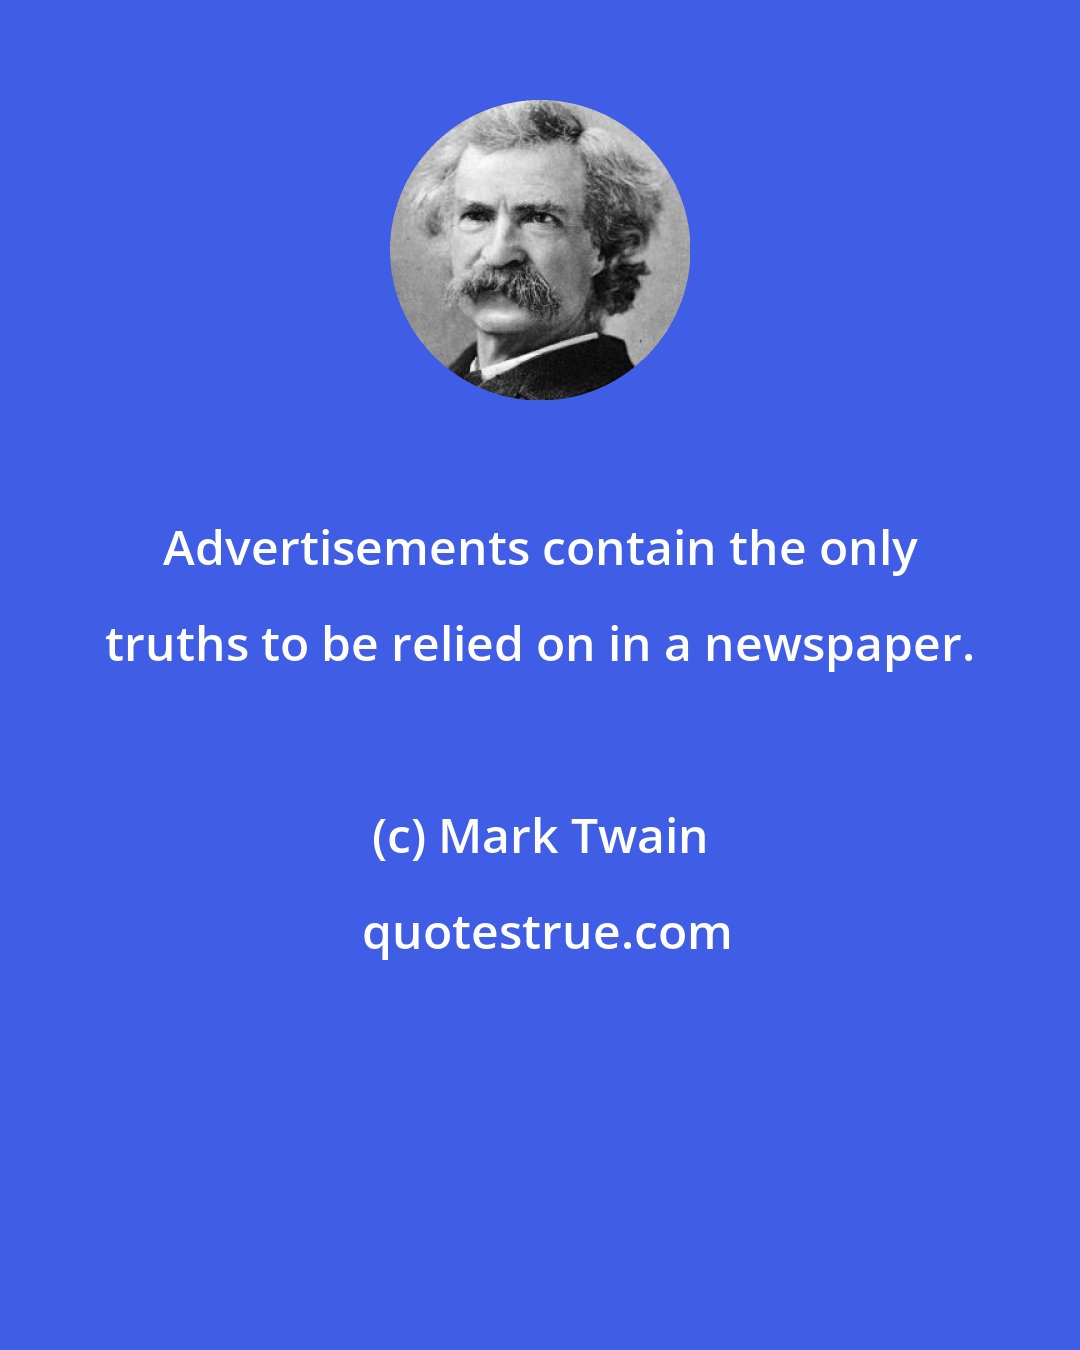 Mark Twain: Advertisements contain the only truths to be relied on in a newspaper.